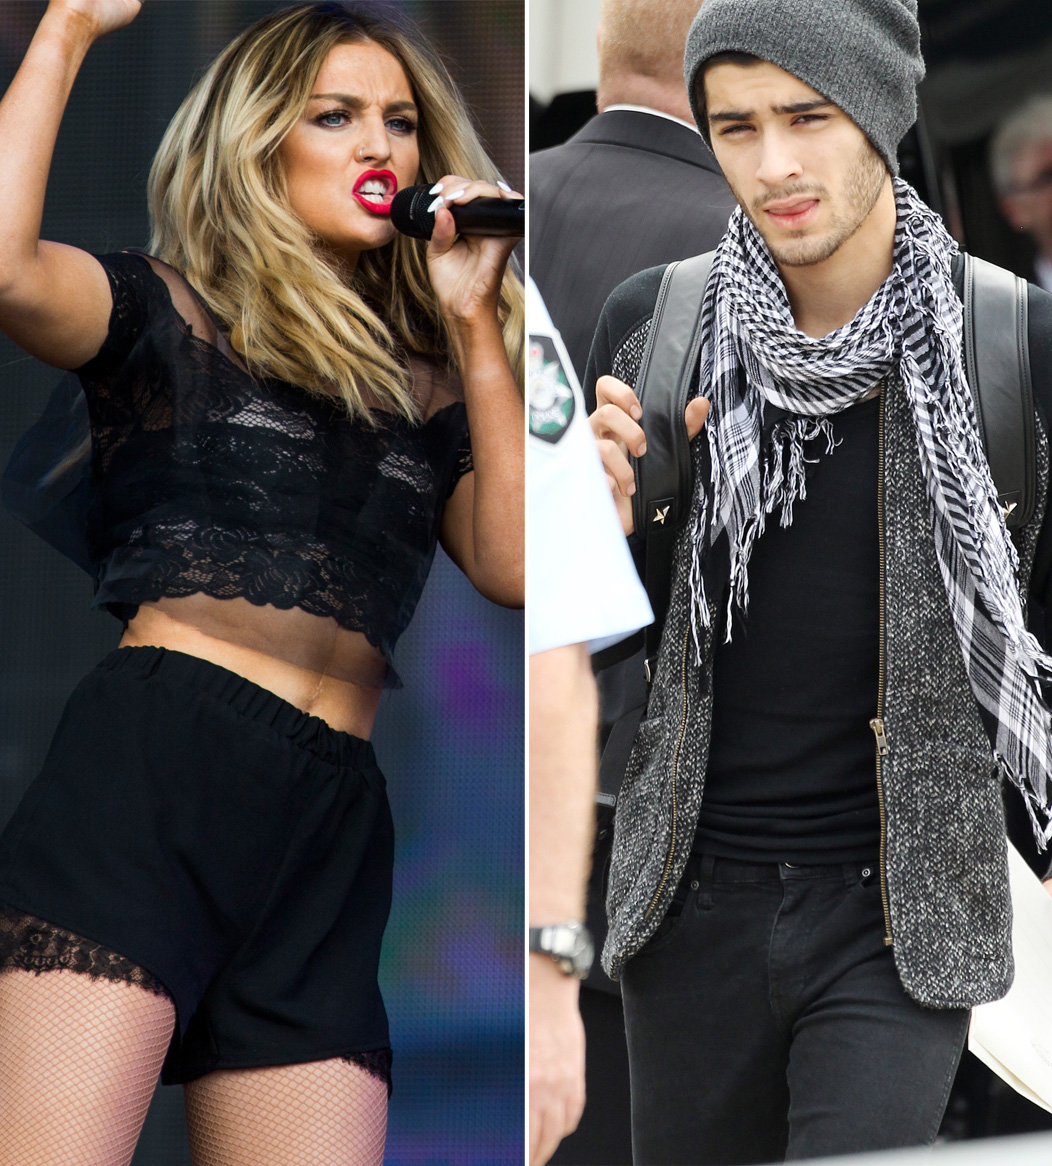 Perrie Edwards And Zayn Malik Both Look Amazing But Are 